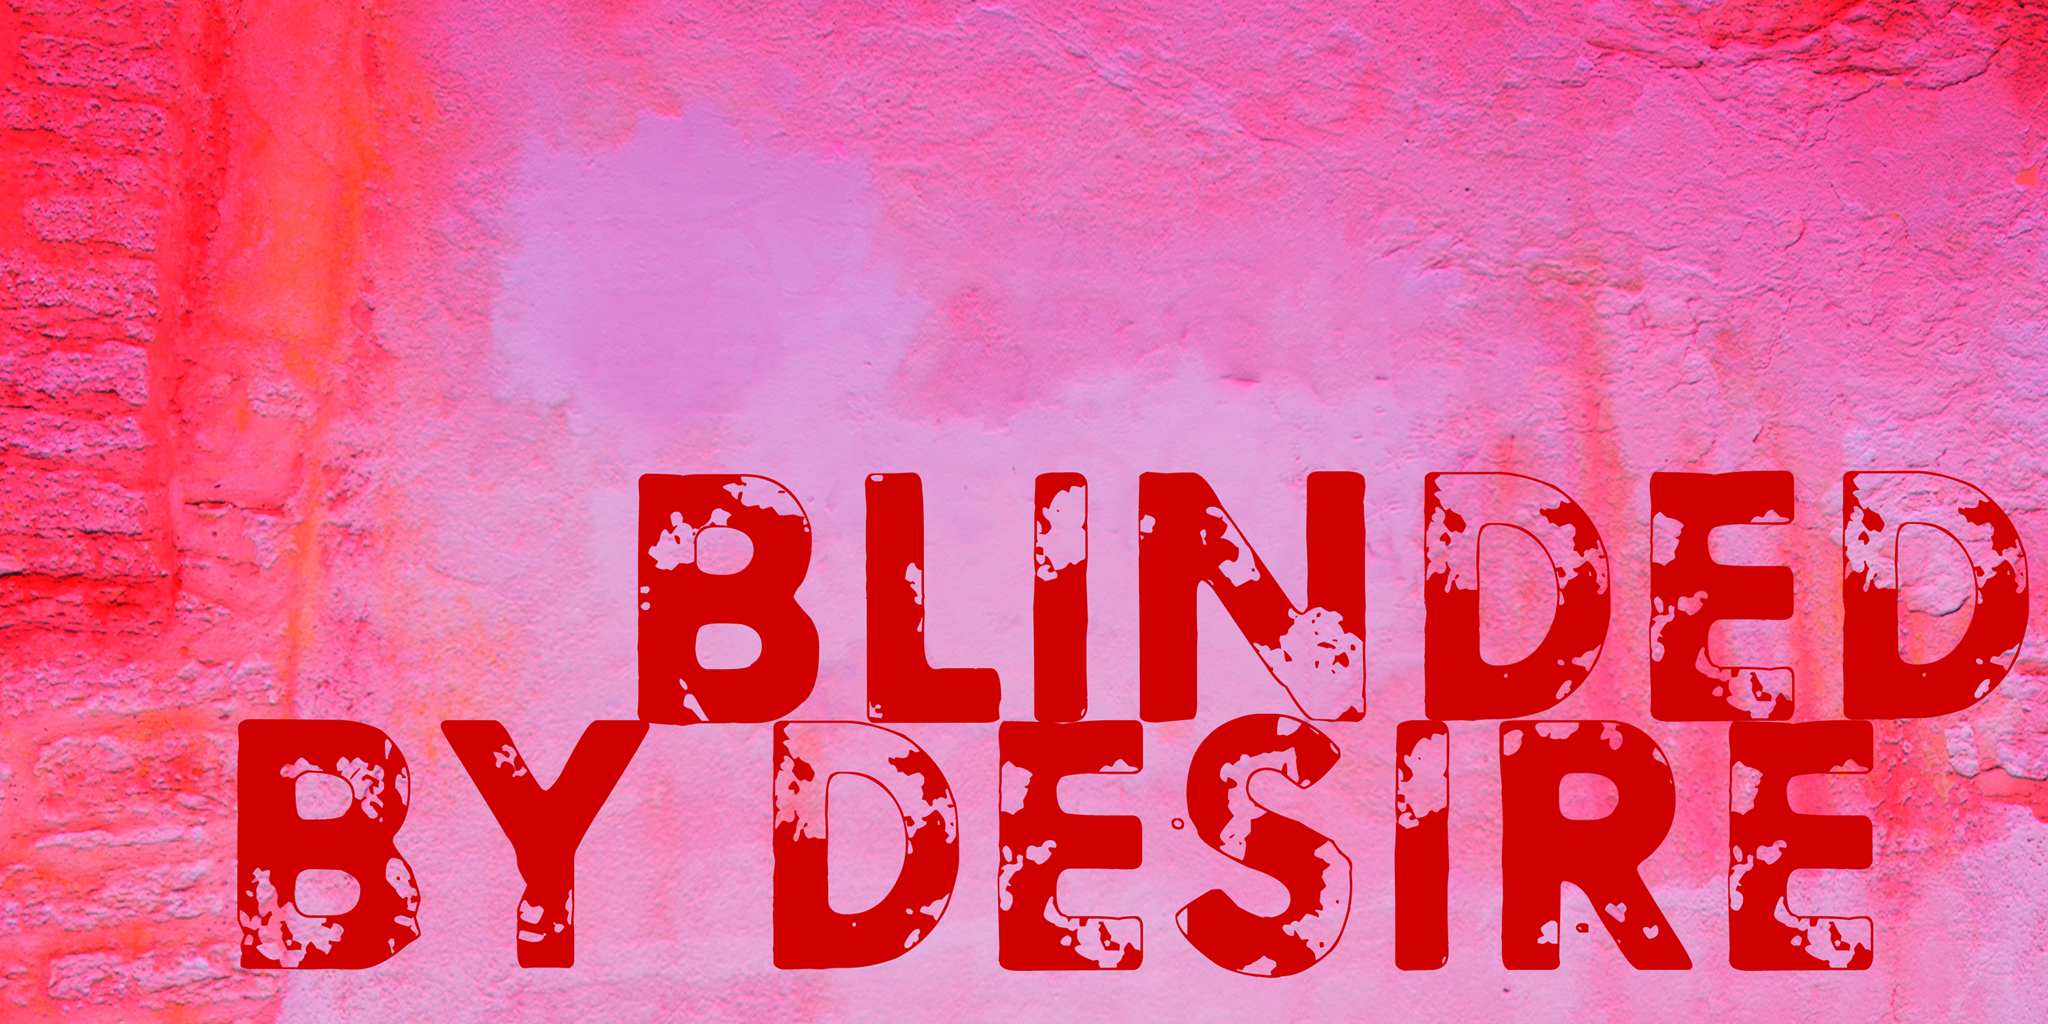 Blinded By Desire